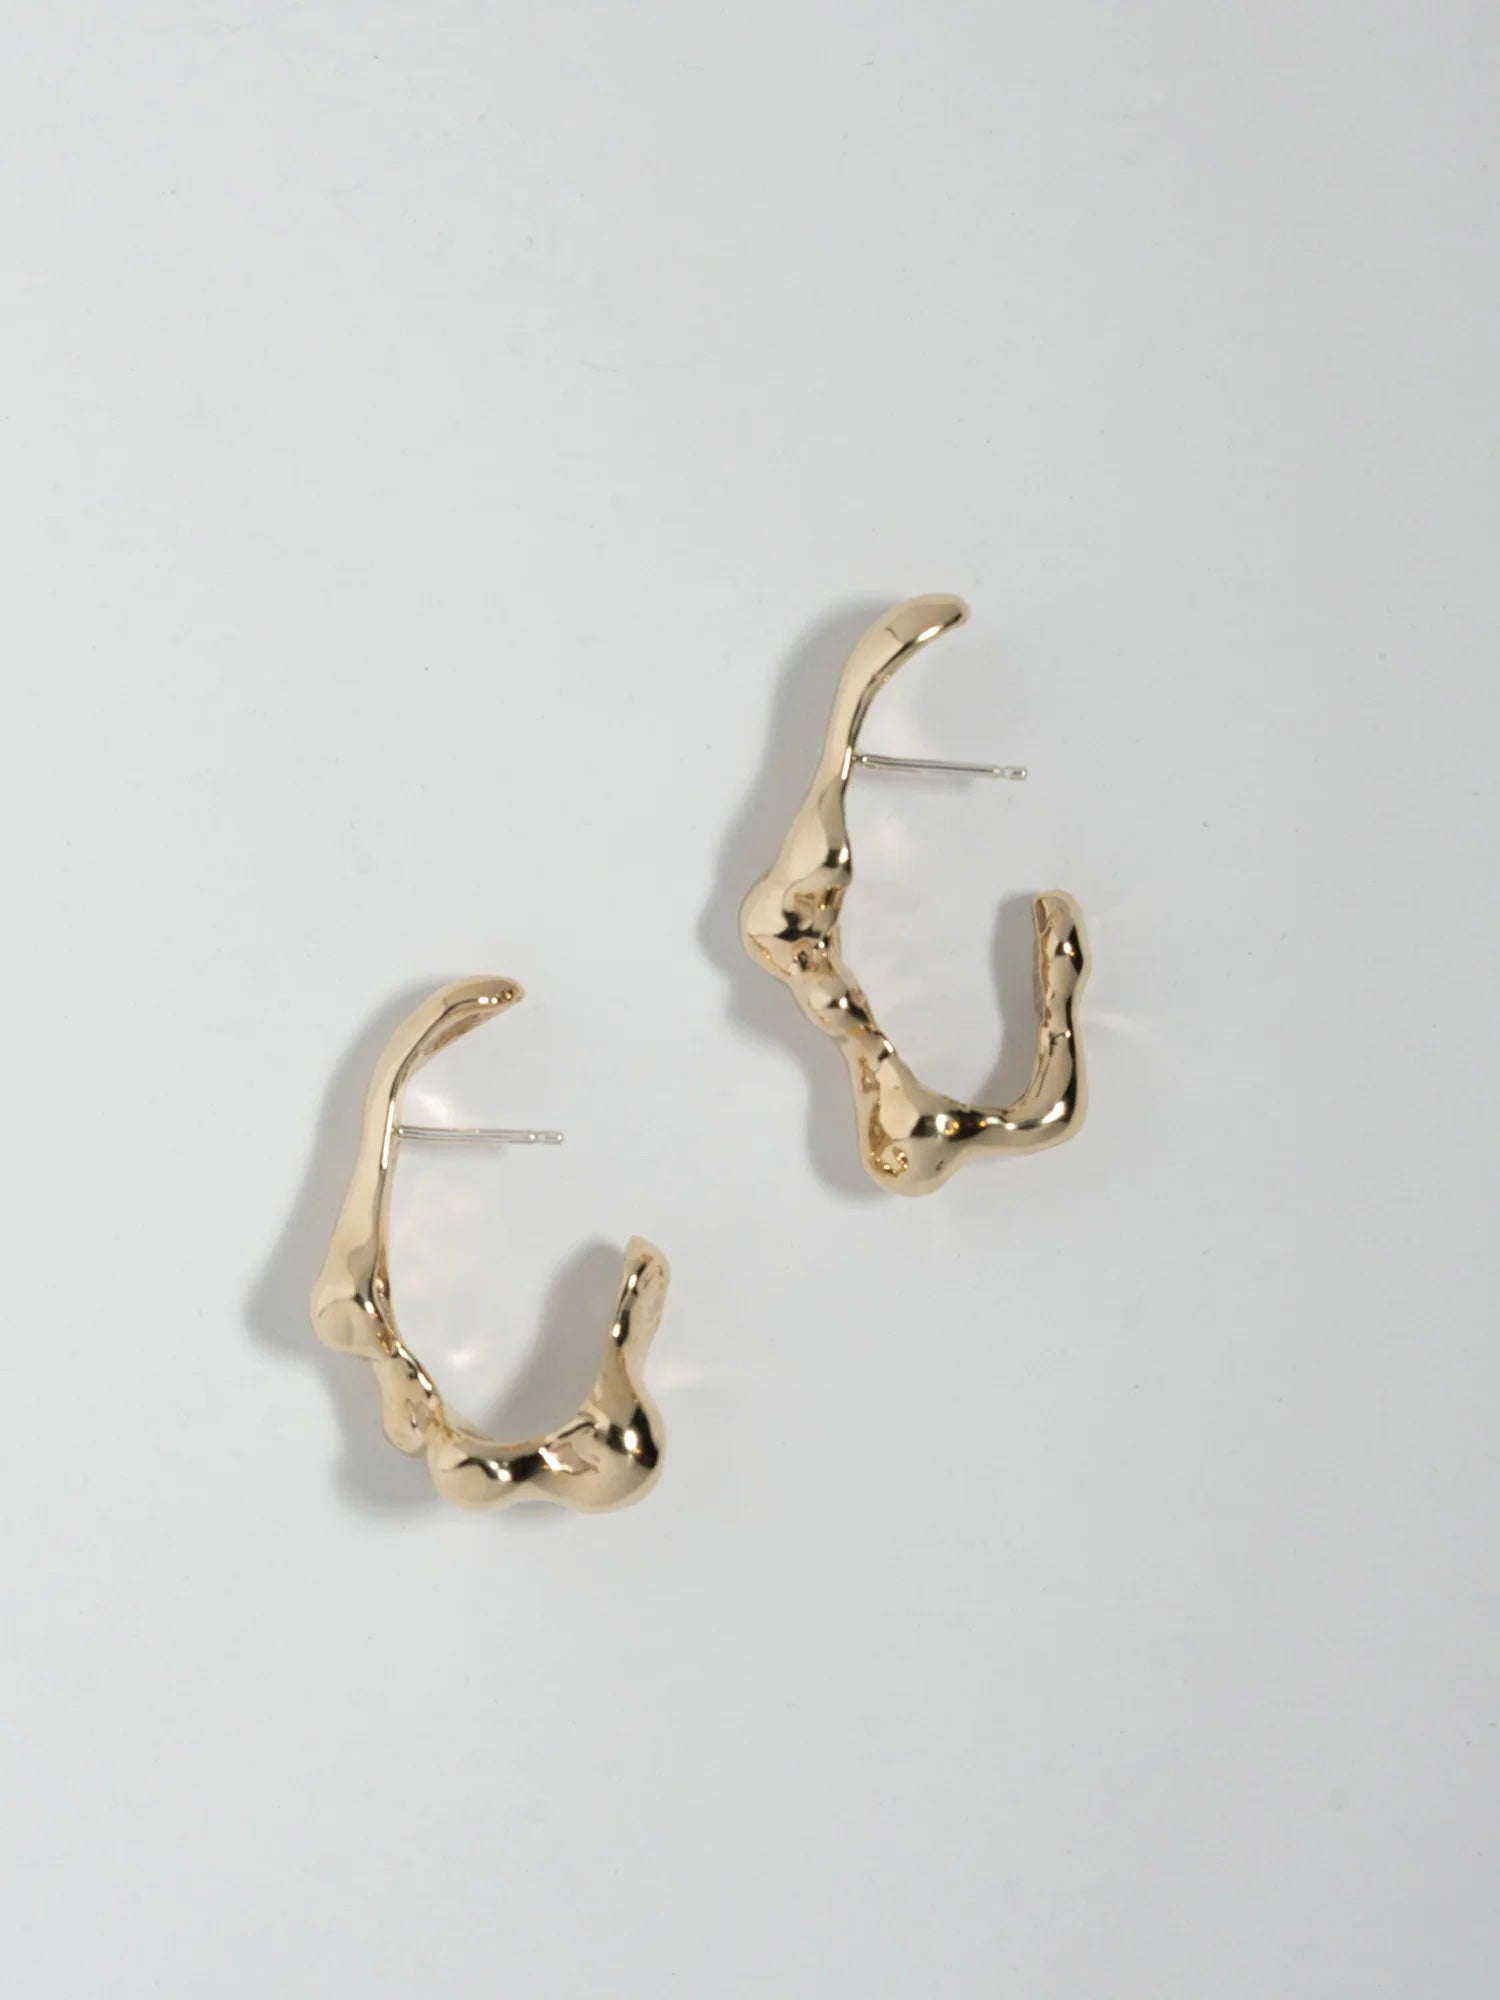 Gold Plated Seep Hook Faris Jewelry Seattle USA